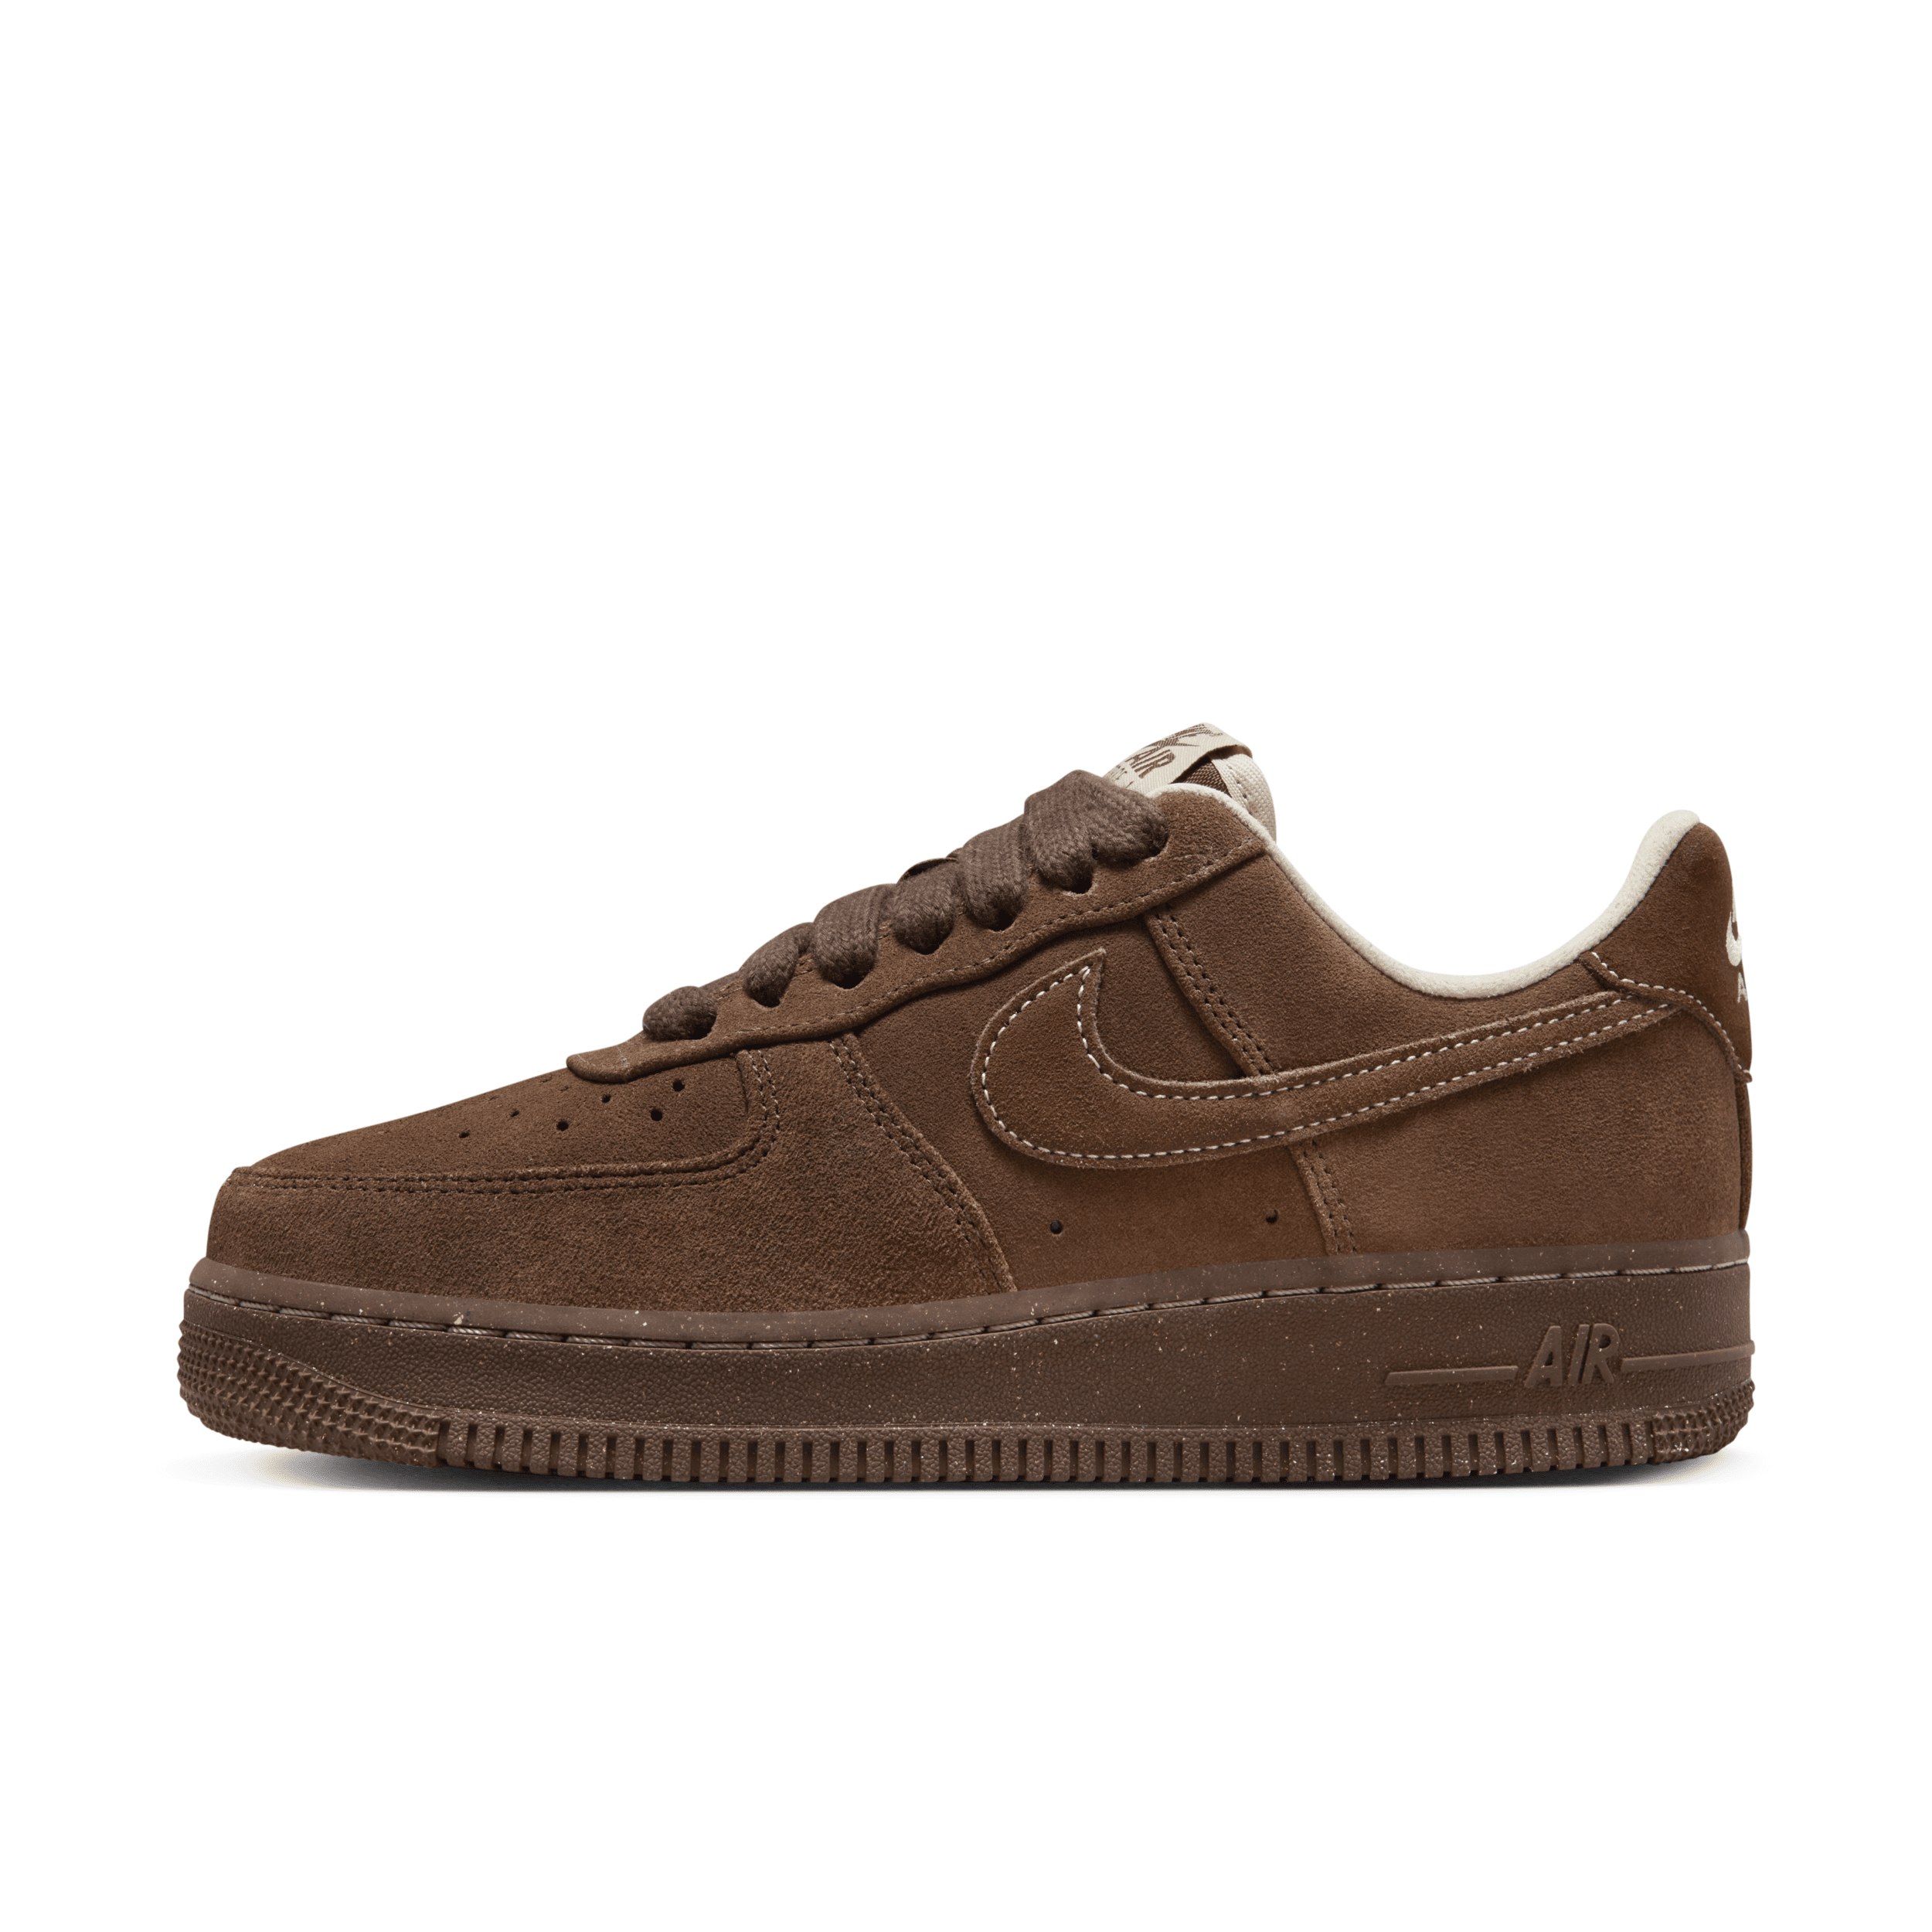 NIKE WOMEN'S AIR FORCE 1 '07 SHOES,1013628696